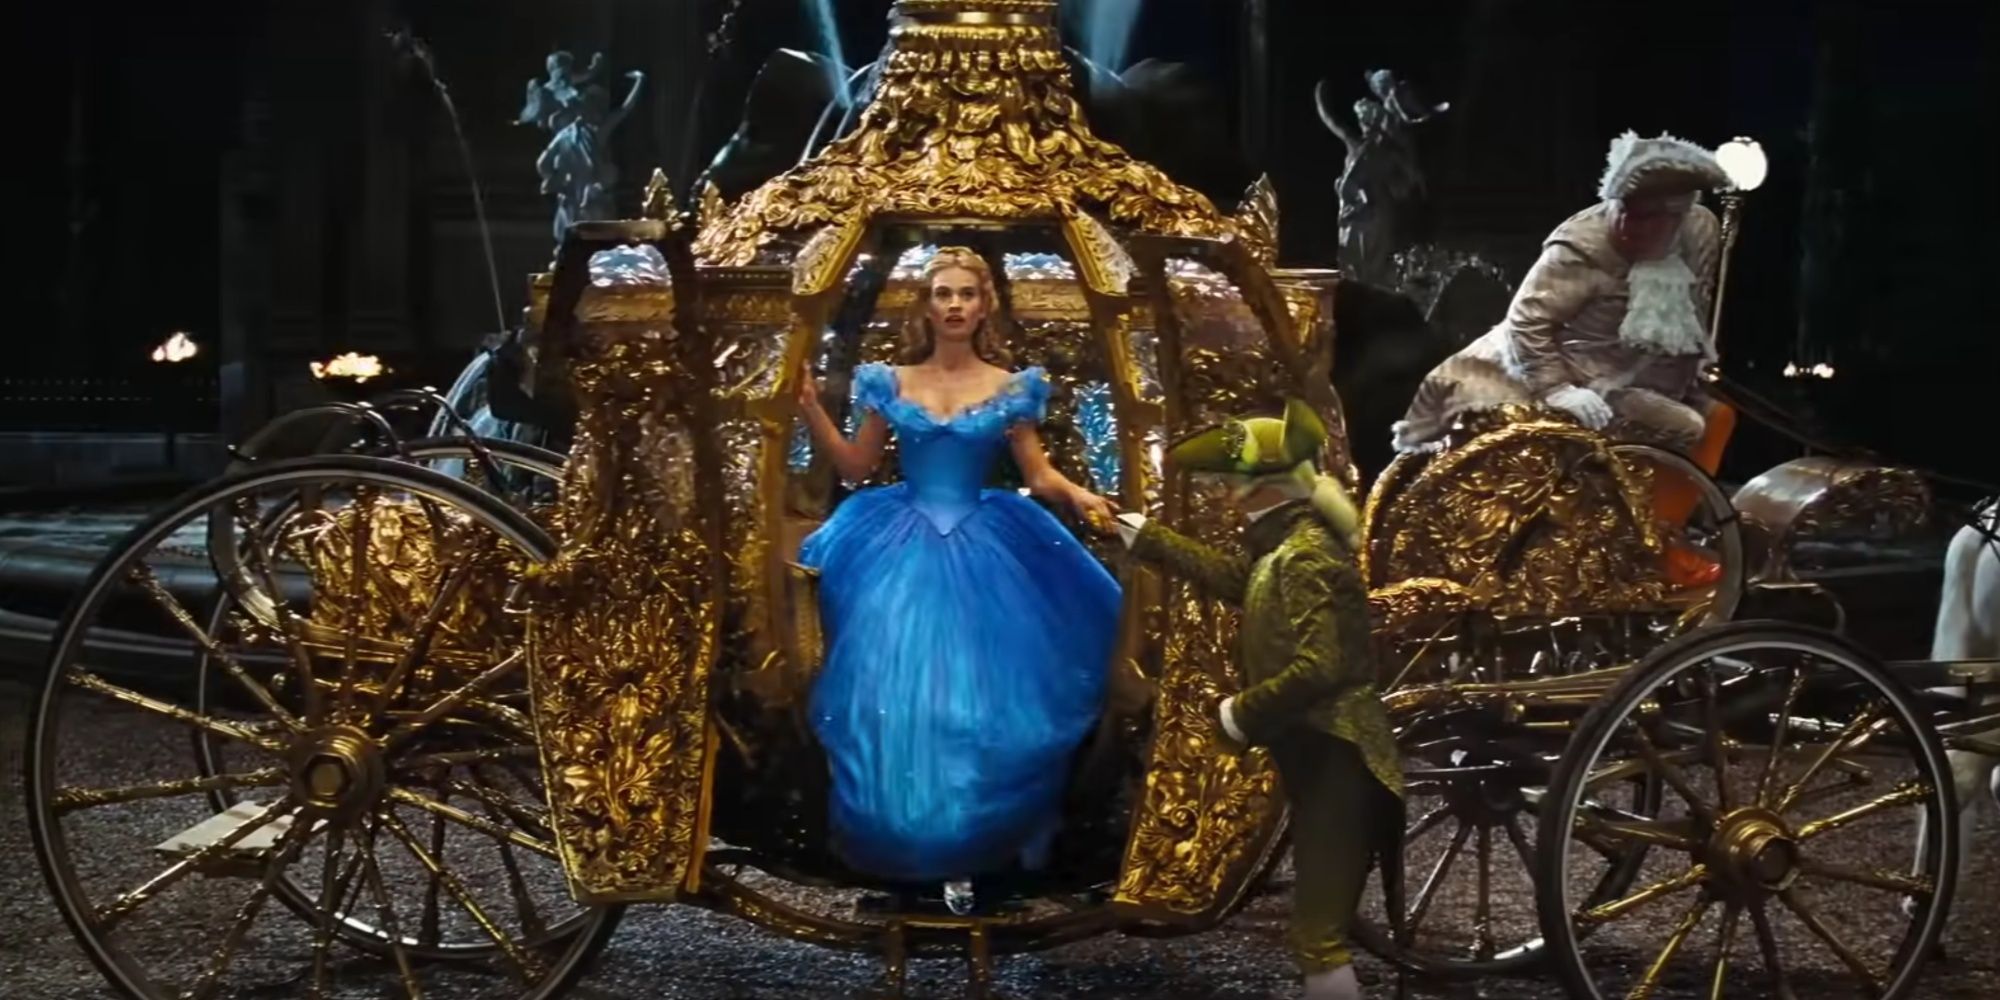 In the 2015 live-action film, Lily James played Cinderella, who was rescued from the golden carriage and headed to the ball.